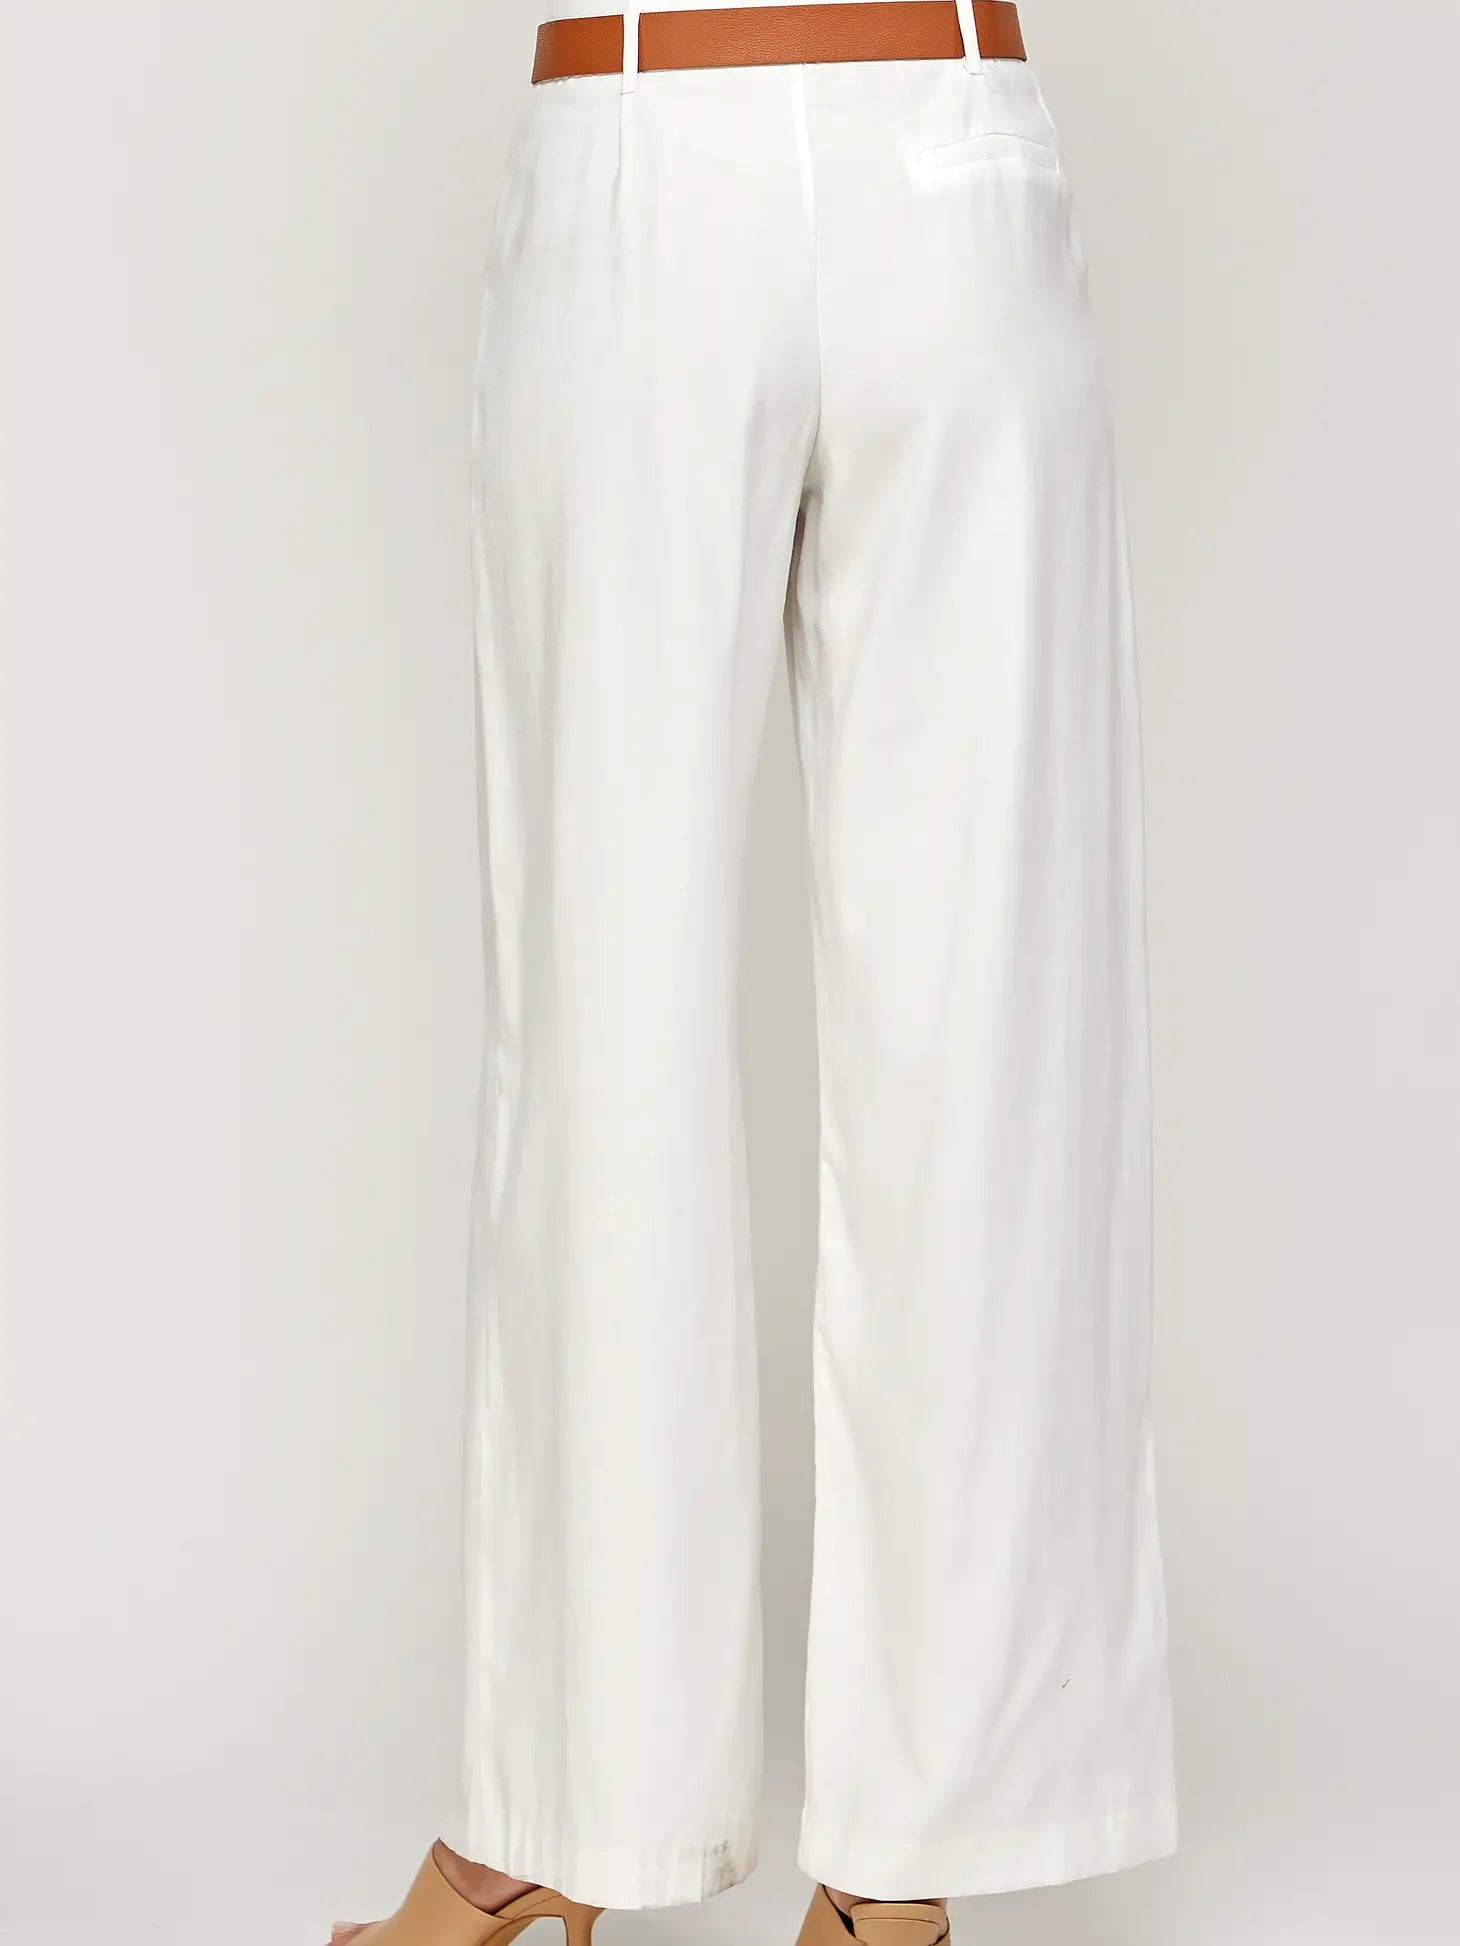 White wide legged trousers, Ellison pants, whimsy whoo boutique store, boutique Fayetteville ar